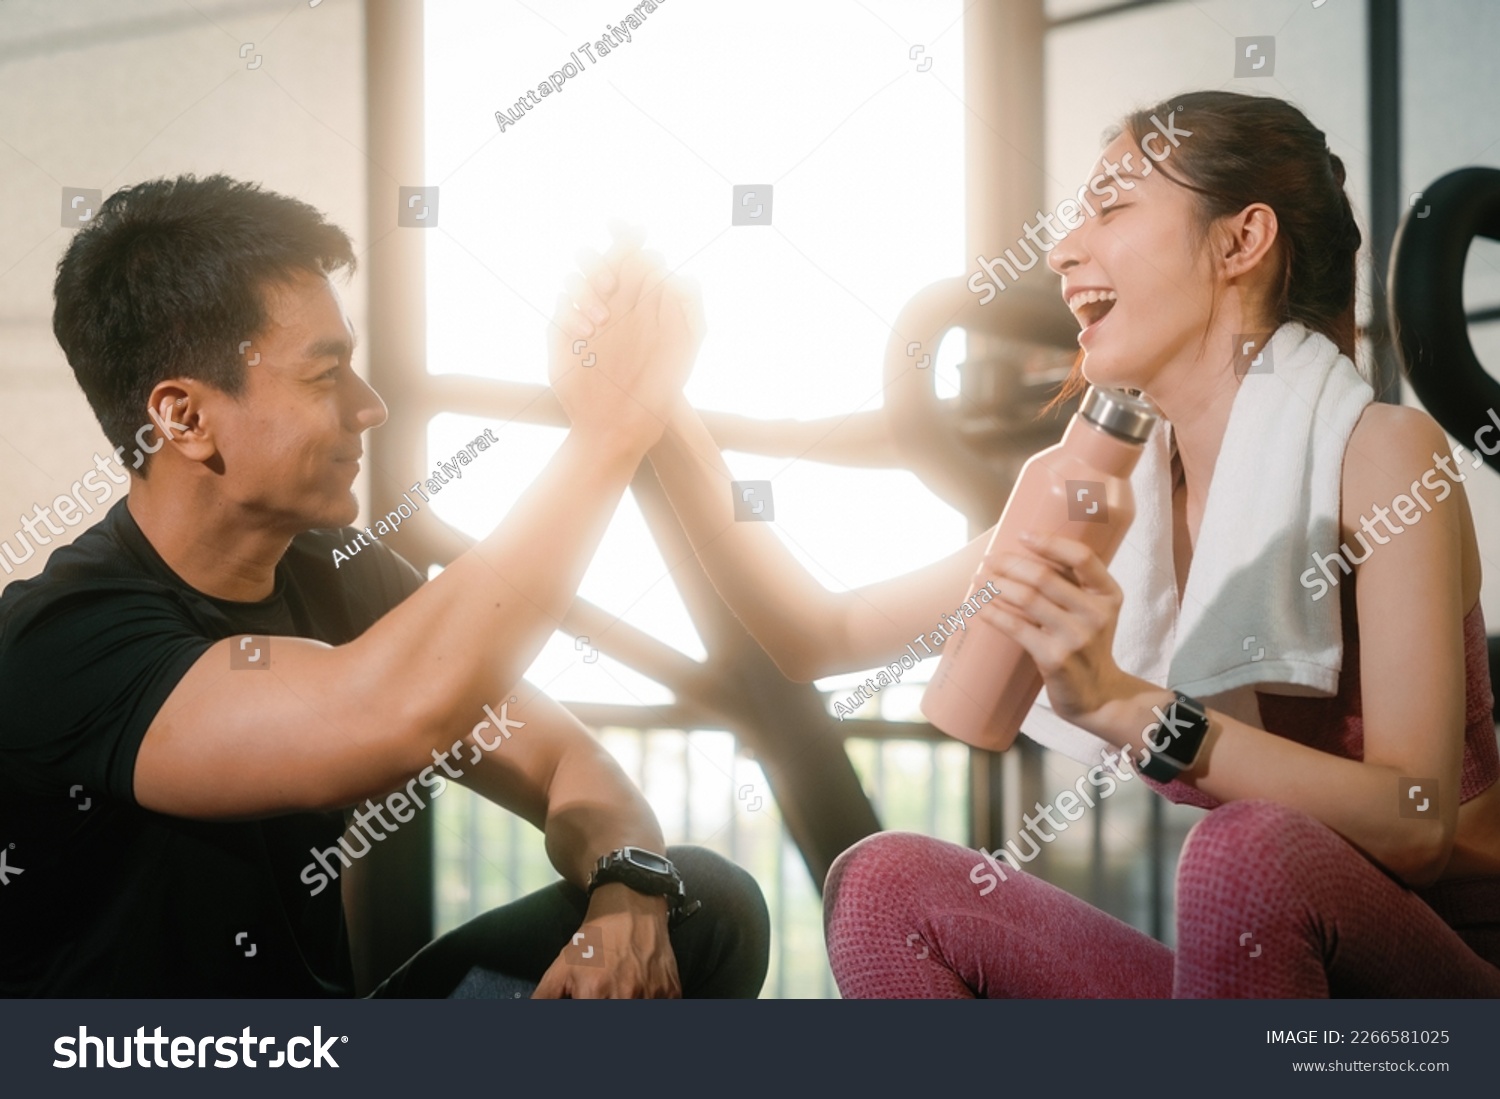 Young slim fitness Asian woman sitting and shake hands with personal trainer conversation for a break in the gym. The athlete leads a healthy lifestyle. Cardio training for weight loss. #2266581025